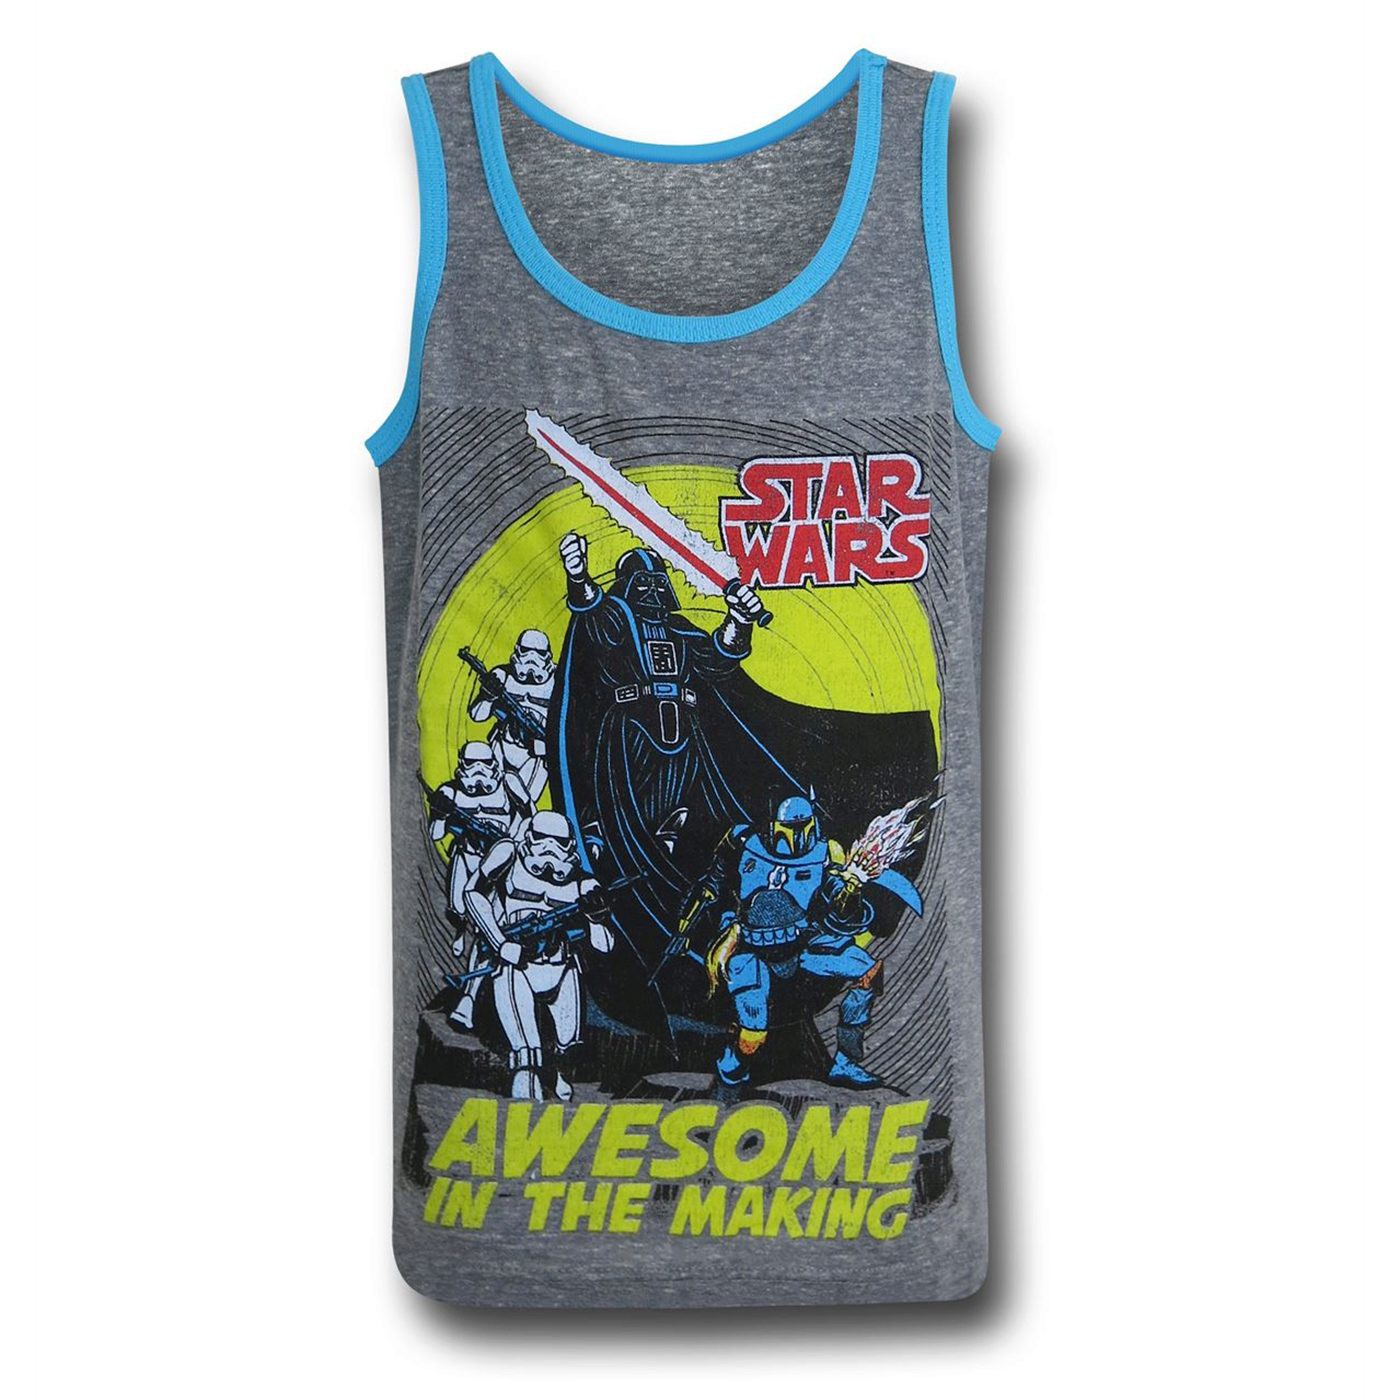 Star Wars Awesome in the Making Kids Tank Top